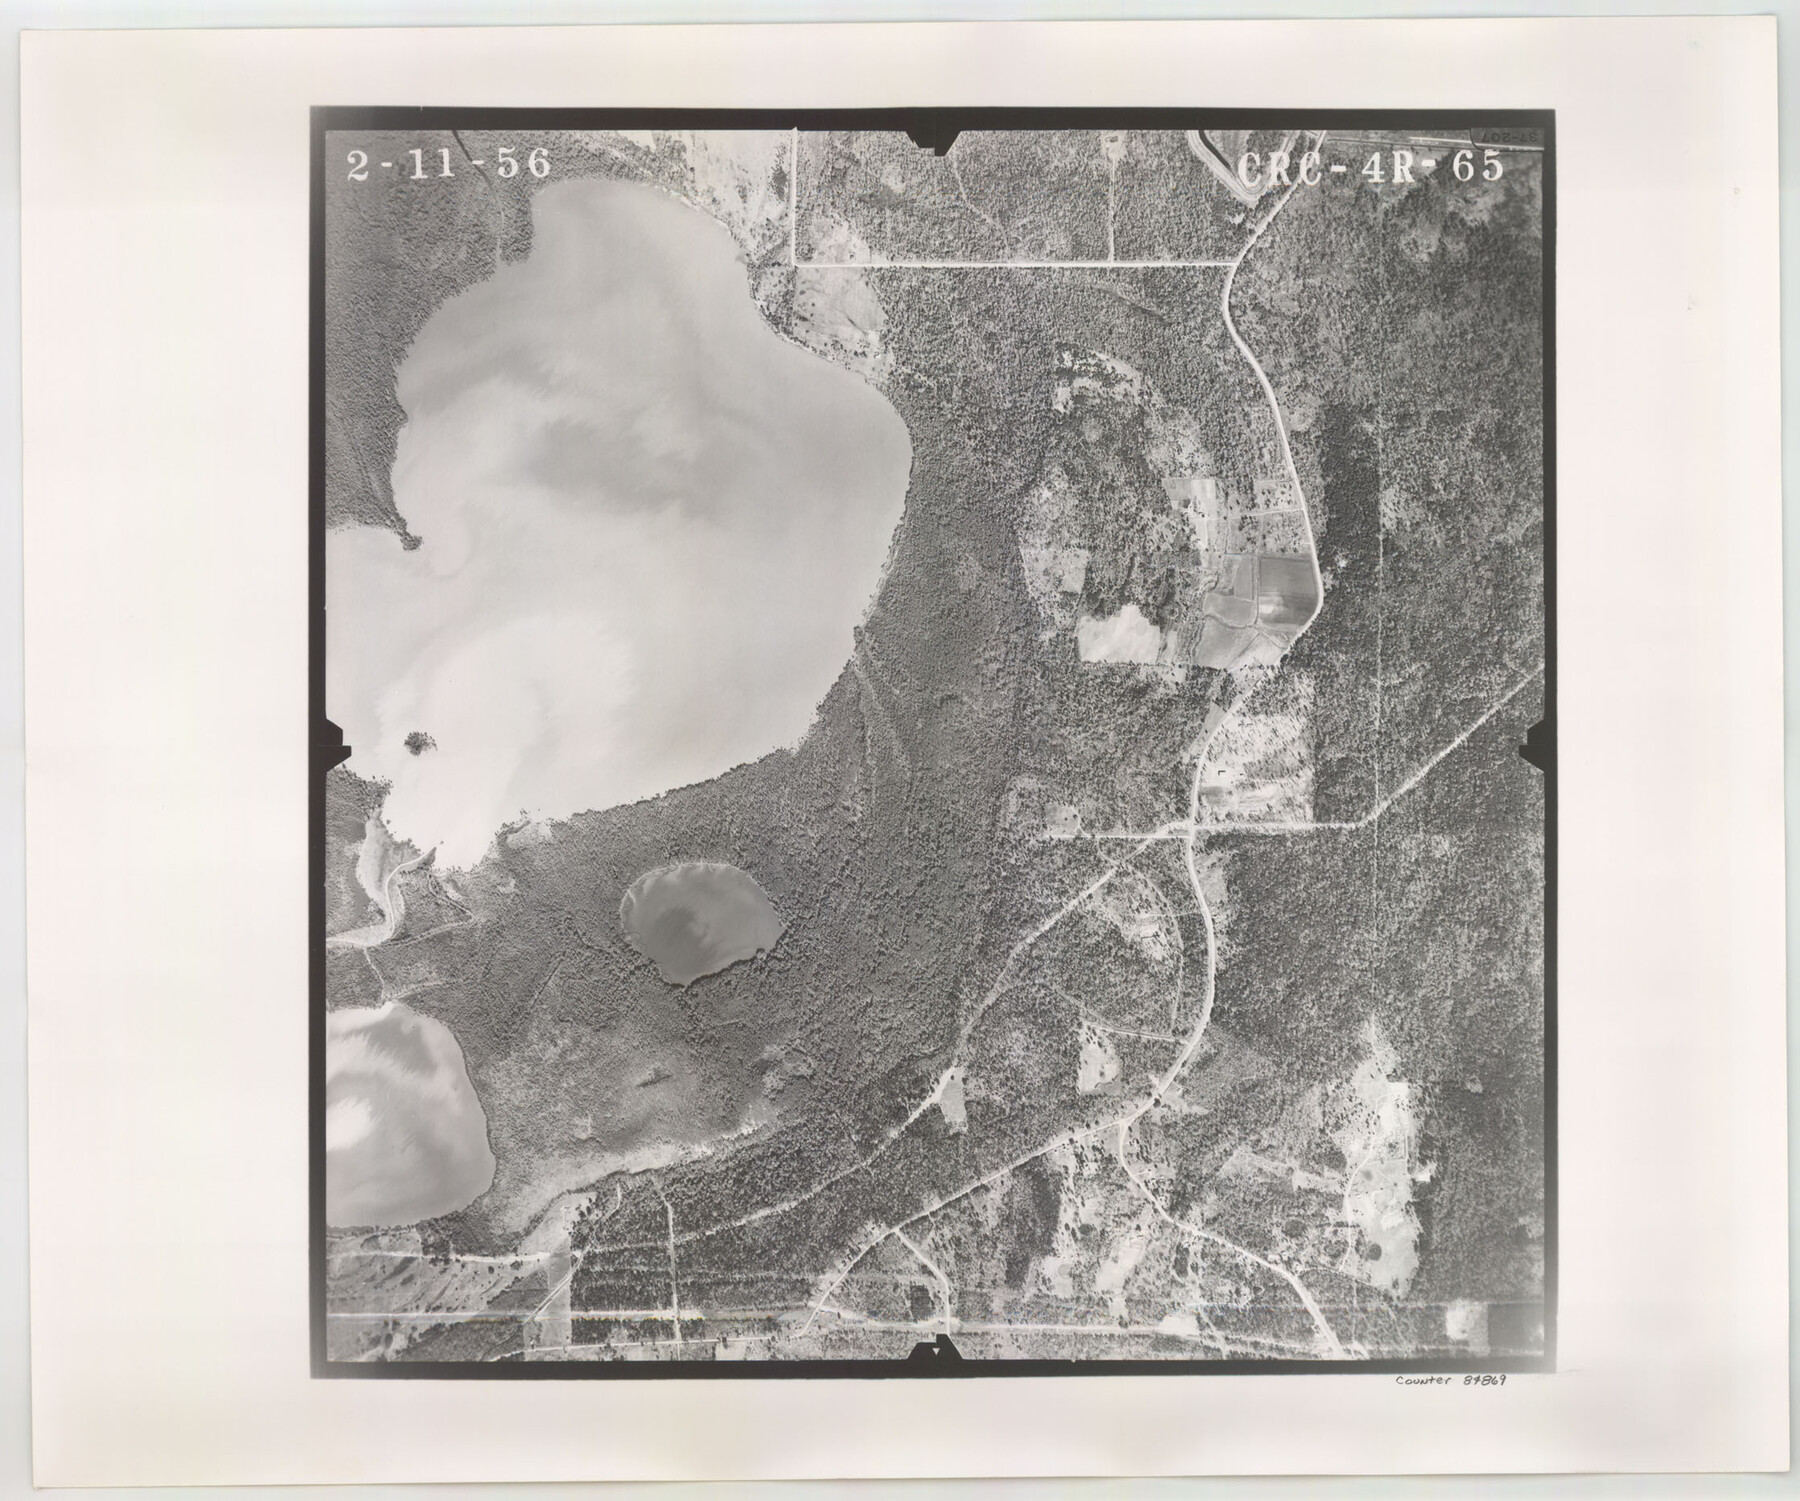 84869, Flight Mission No. CRC-4R, Frame 65, Chambers County, General Map Collection